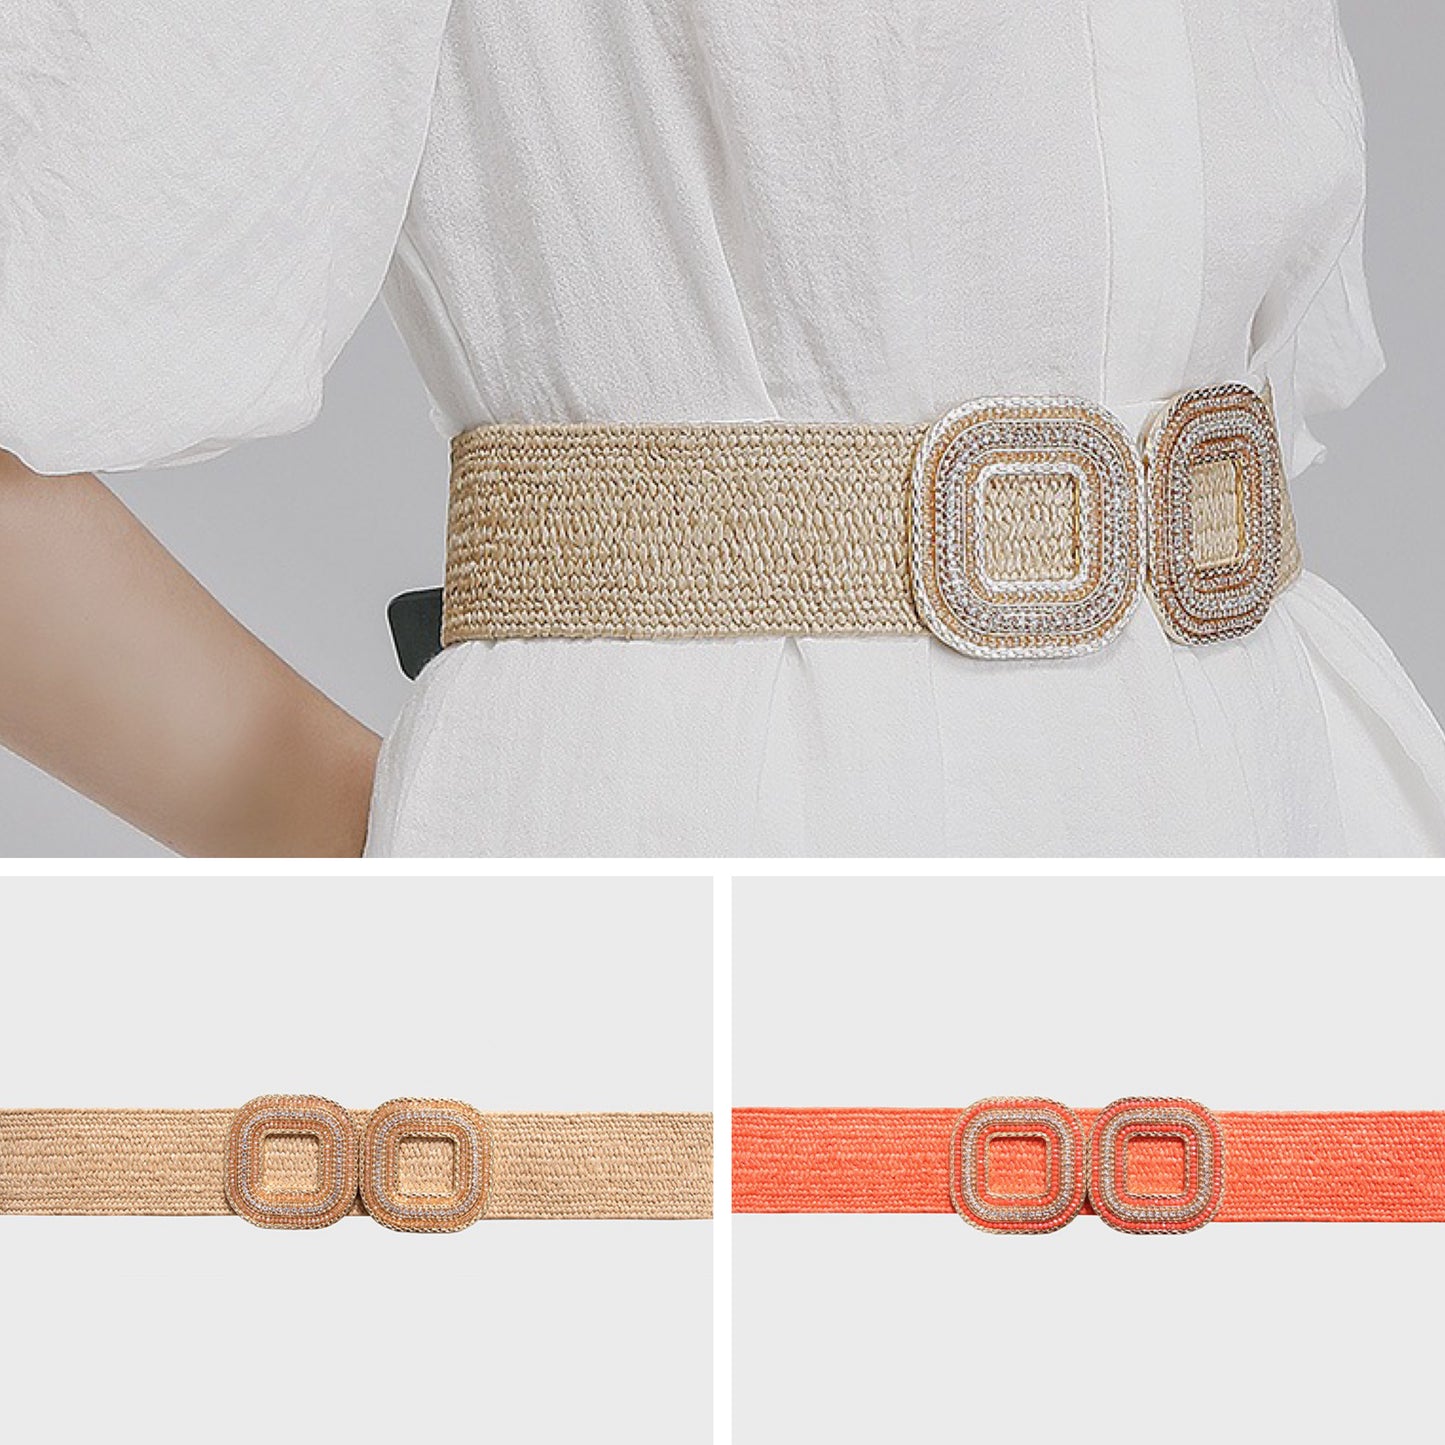 Woven/Braided Stretch Belt with Bead & Stone Detail